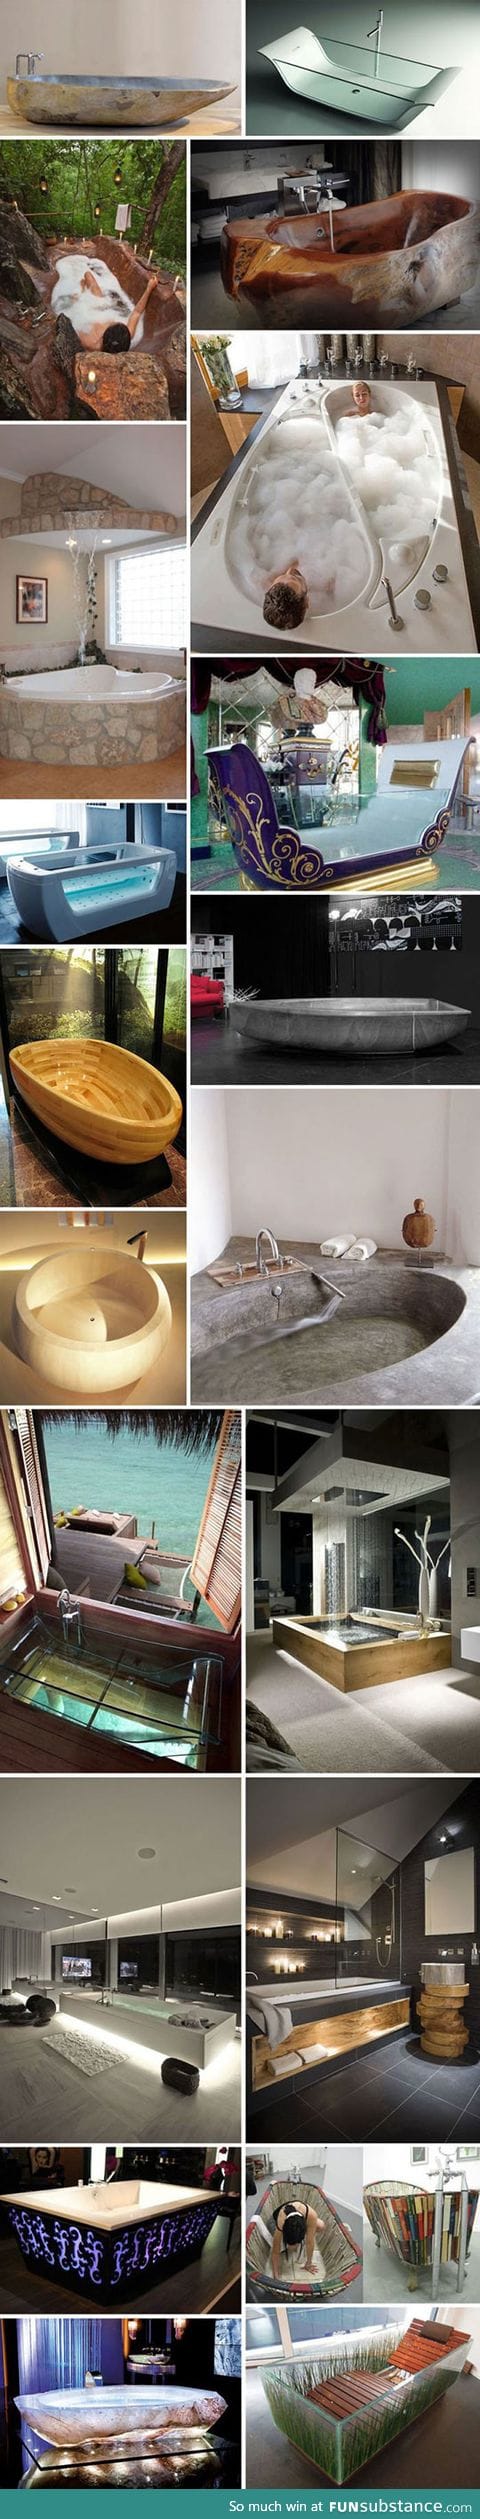 Awesome bathtubs that make you want to jump in